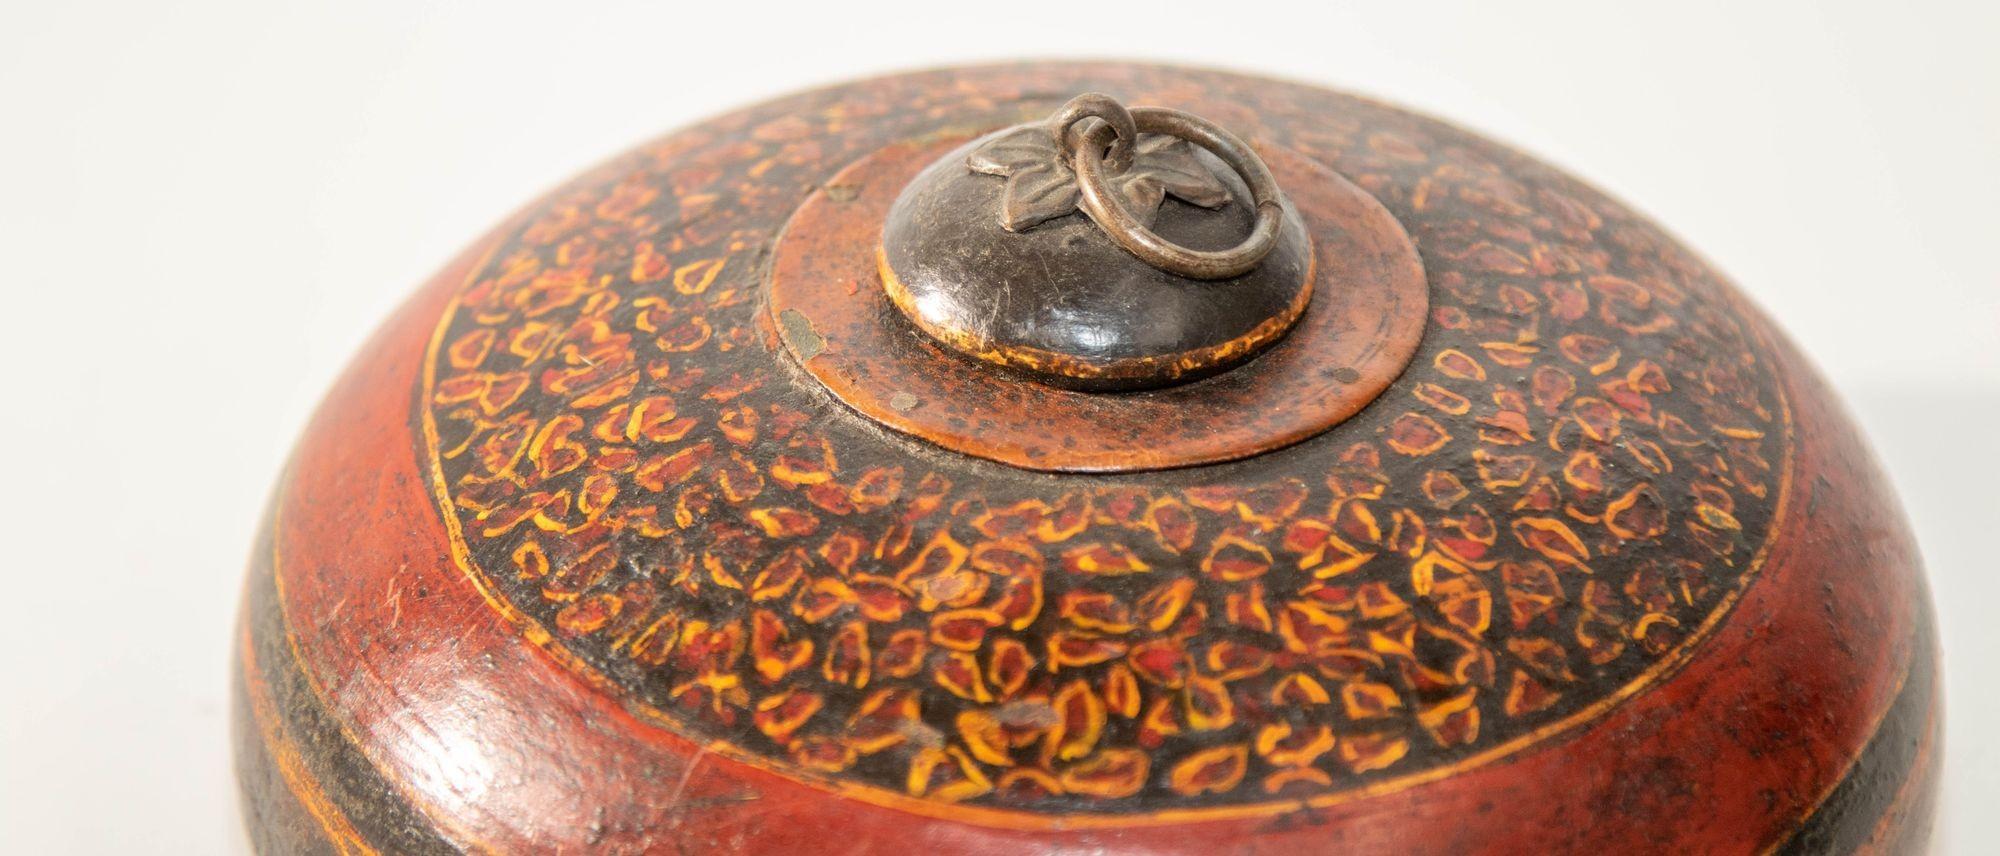 Decorative Antique Asian round wood box container with lid and brass pull.
Vintage collectible Asian wooden tobacco or opium round container.
Round shaped lidded opium container box, hand crafted and hand painted wooden box with brass fittings